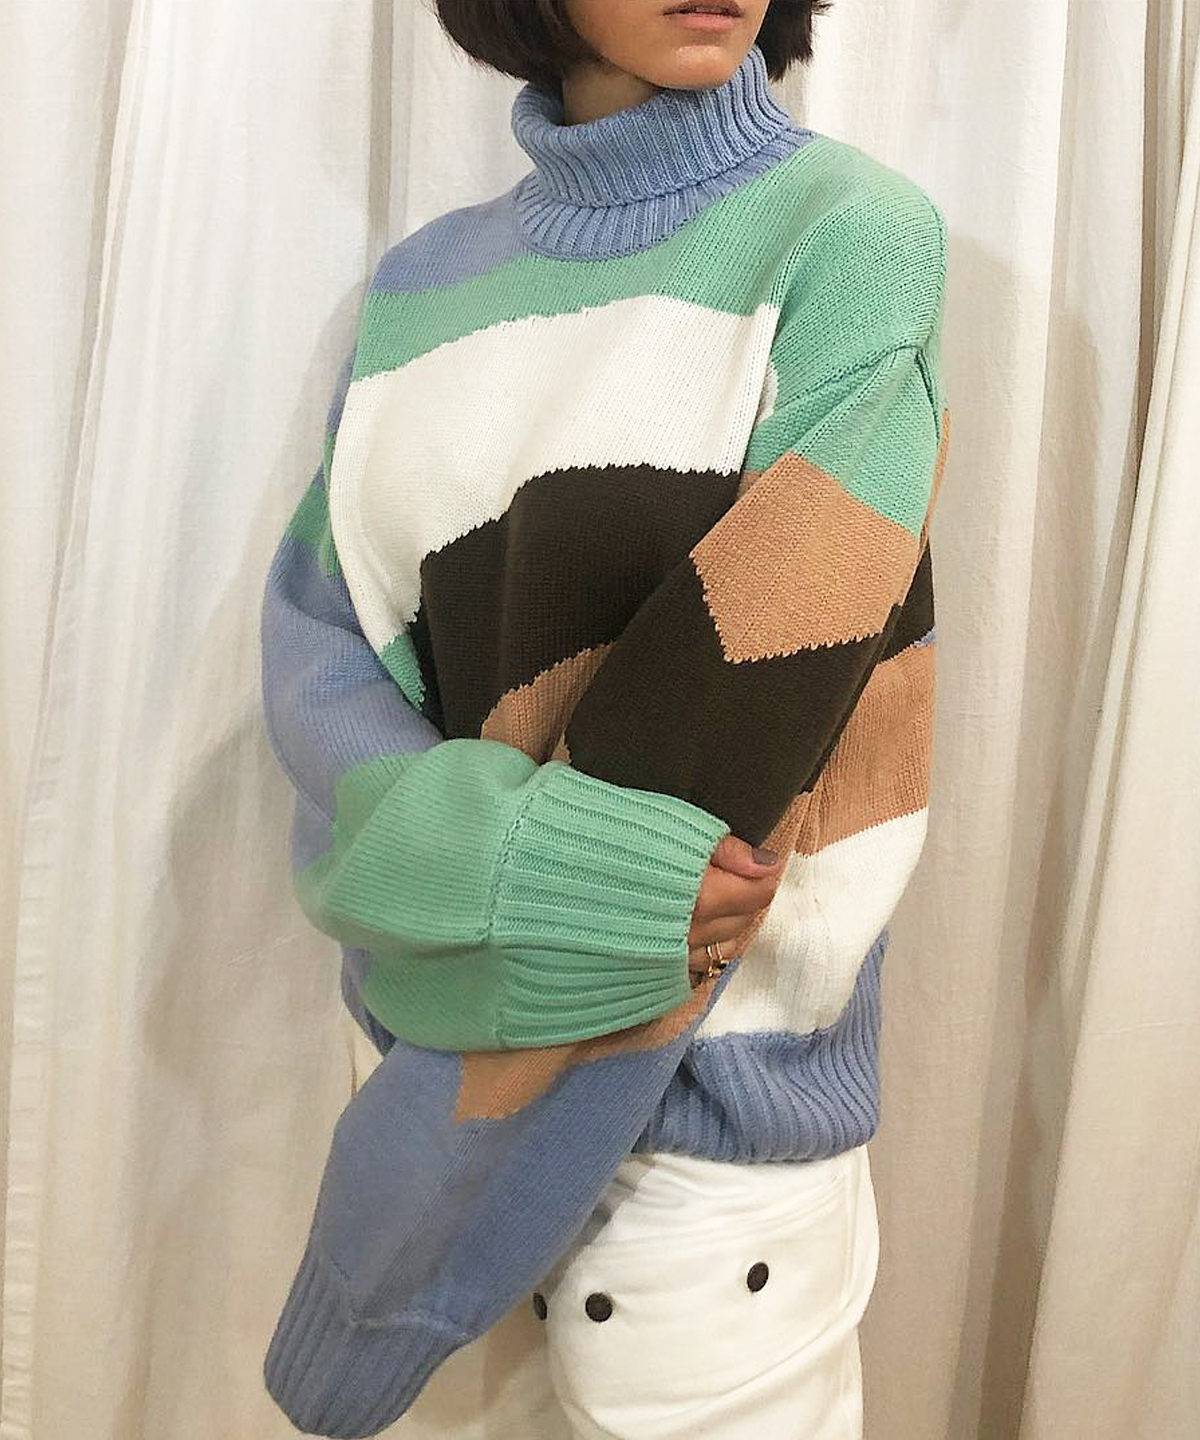 House of Sunny: This "landscape" print jumper is easily our favourite piece